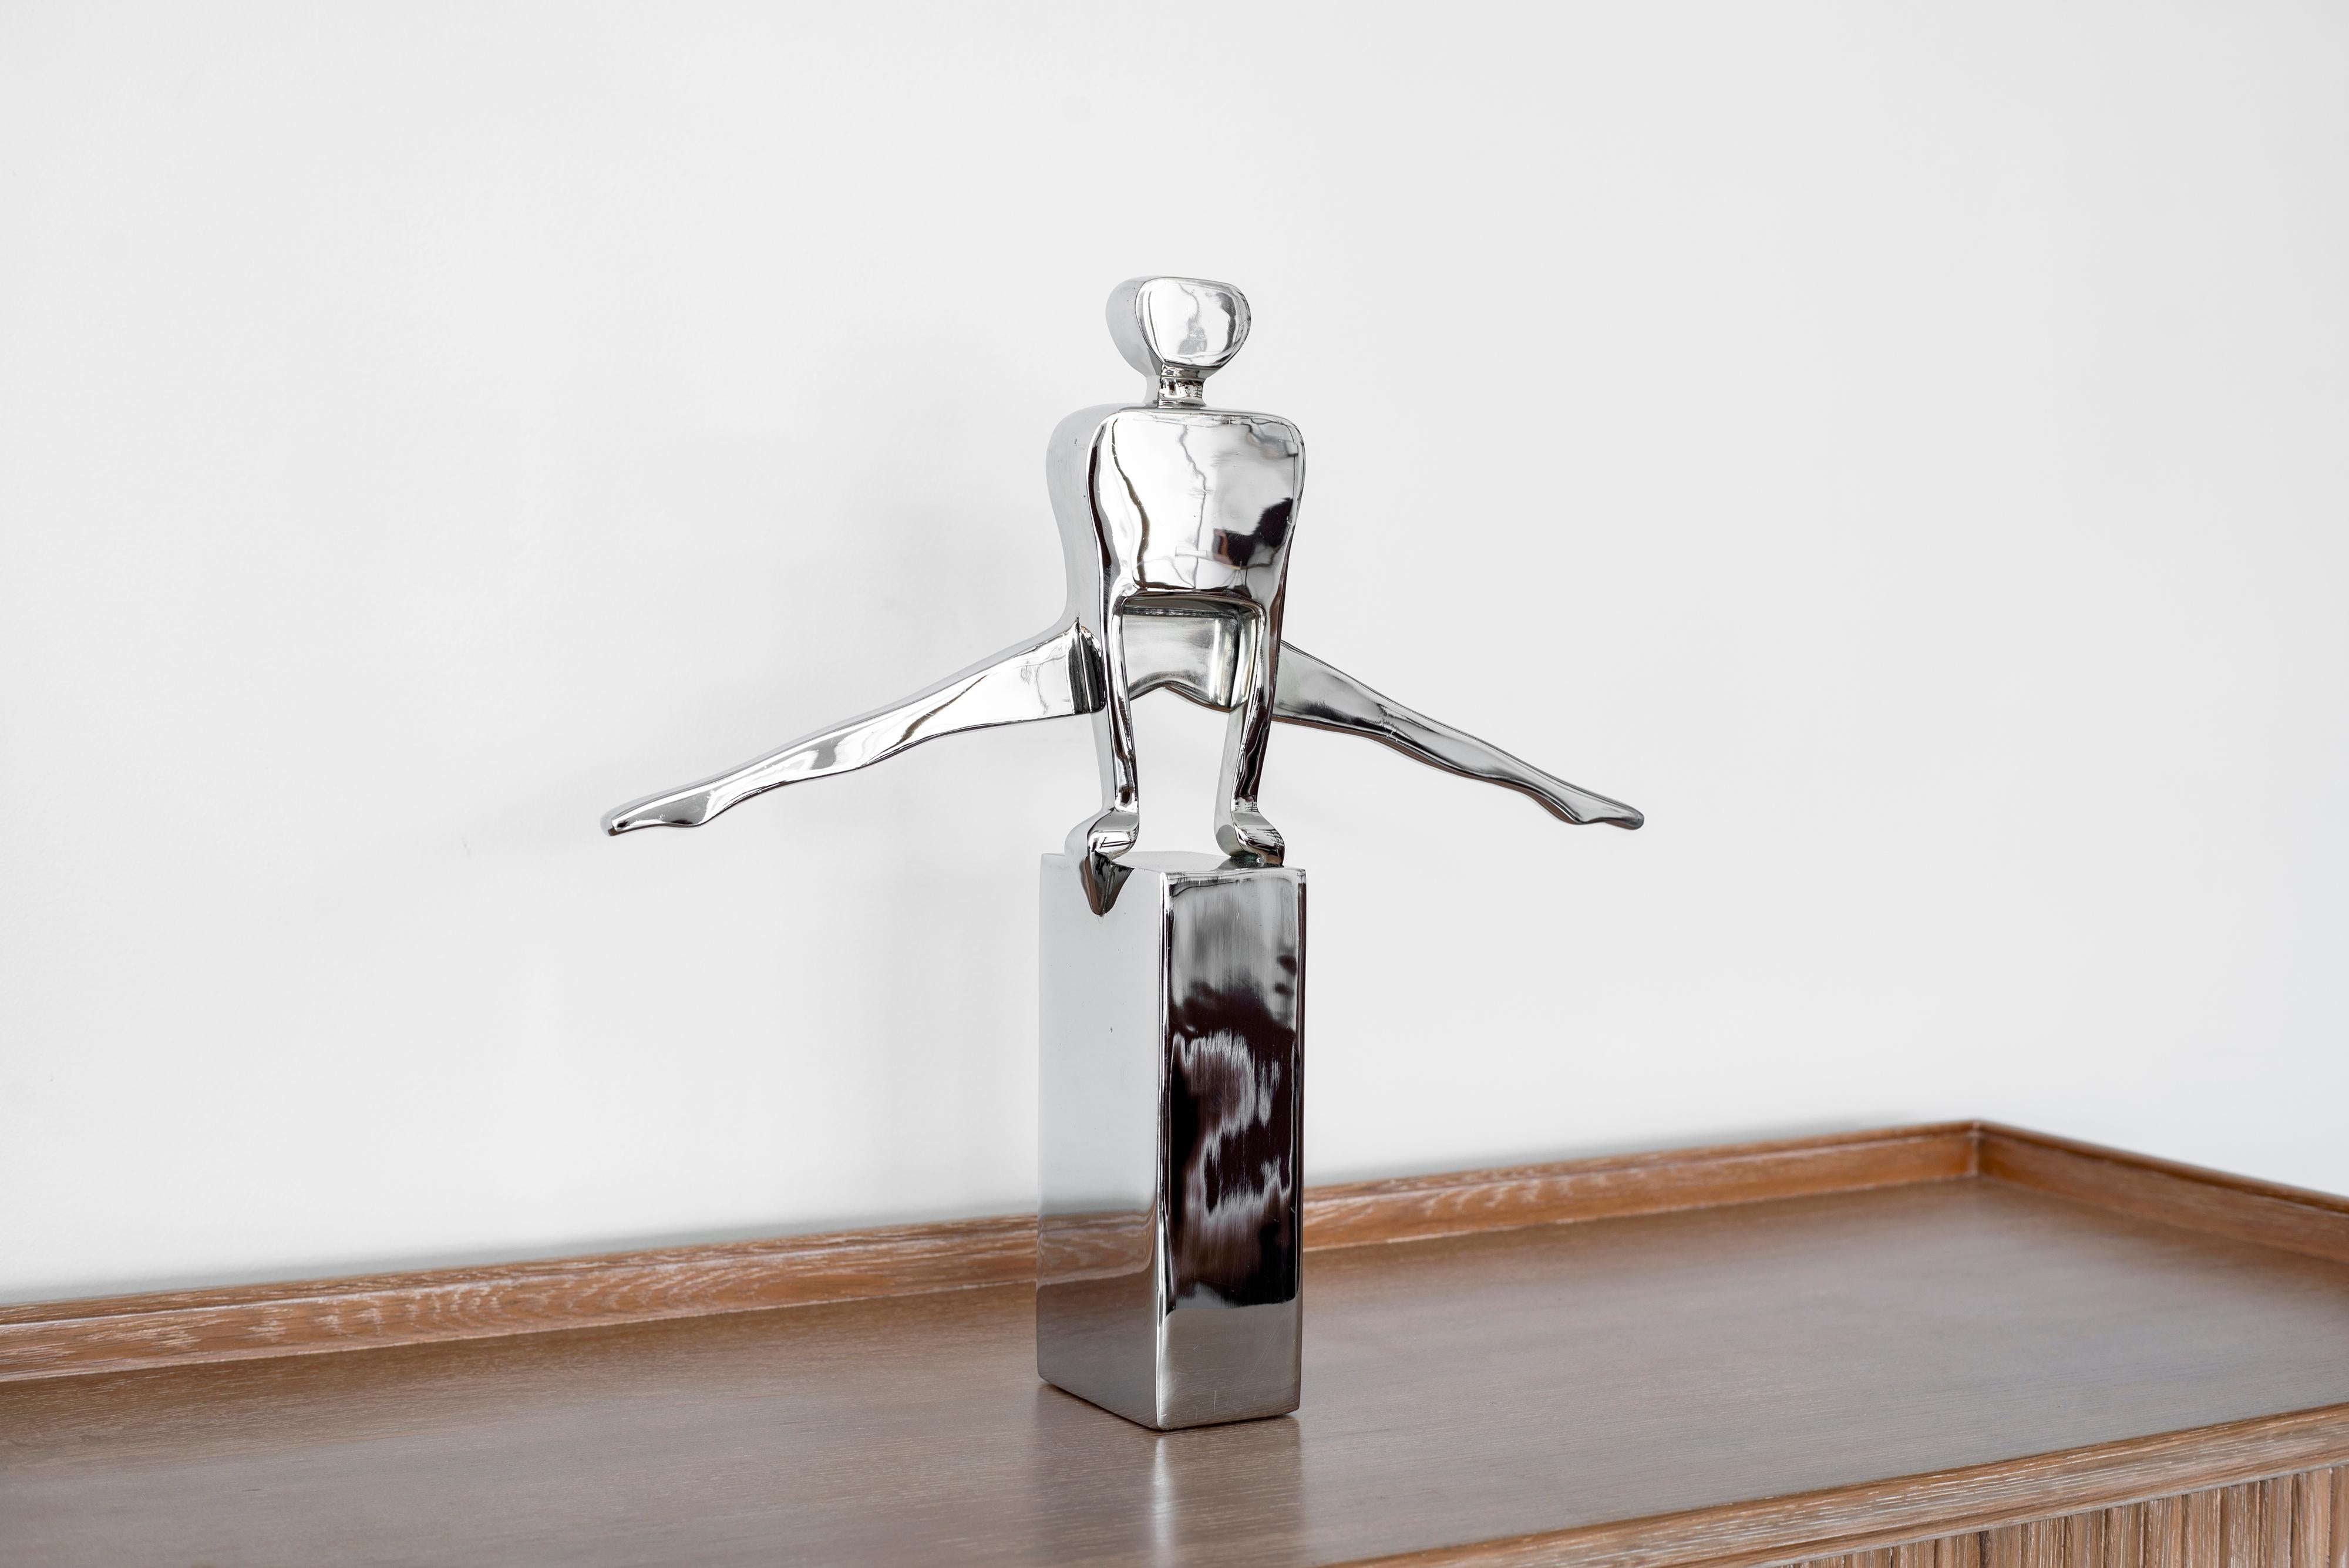 Heavy chrome sculpture of gymnast by Dolbi Cashier with original foil label dated 1987.